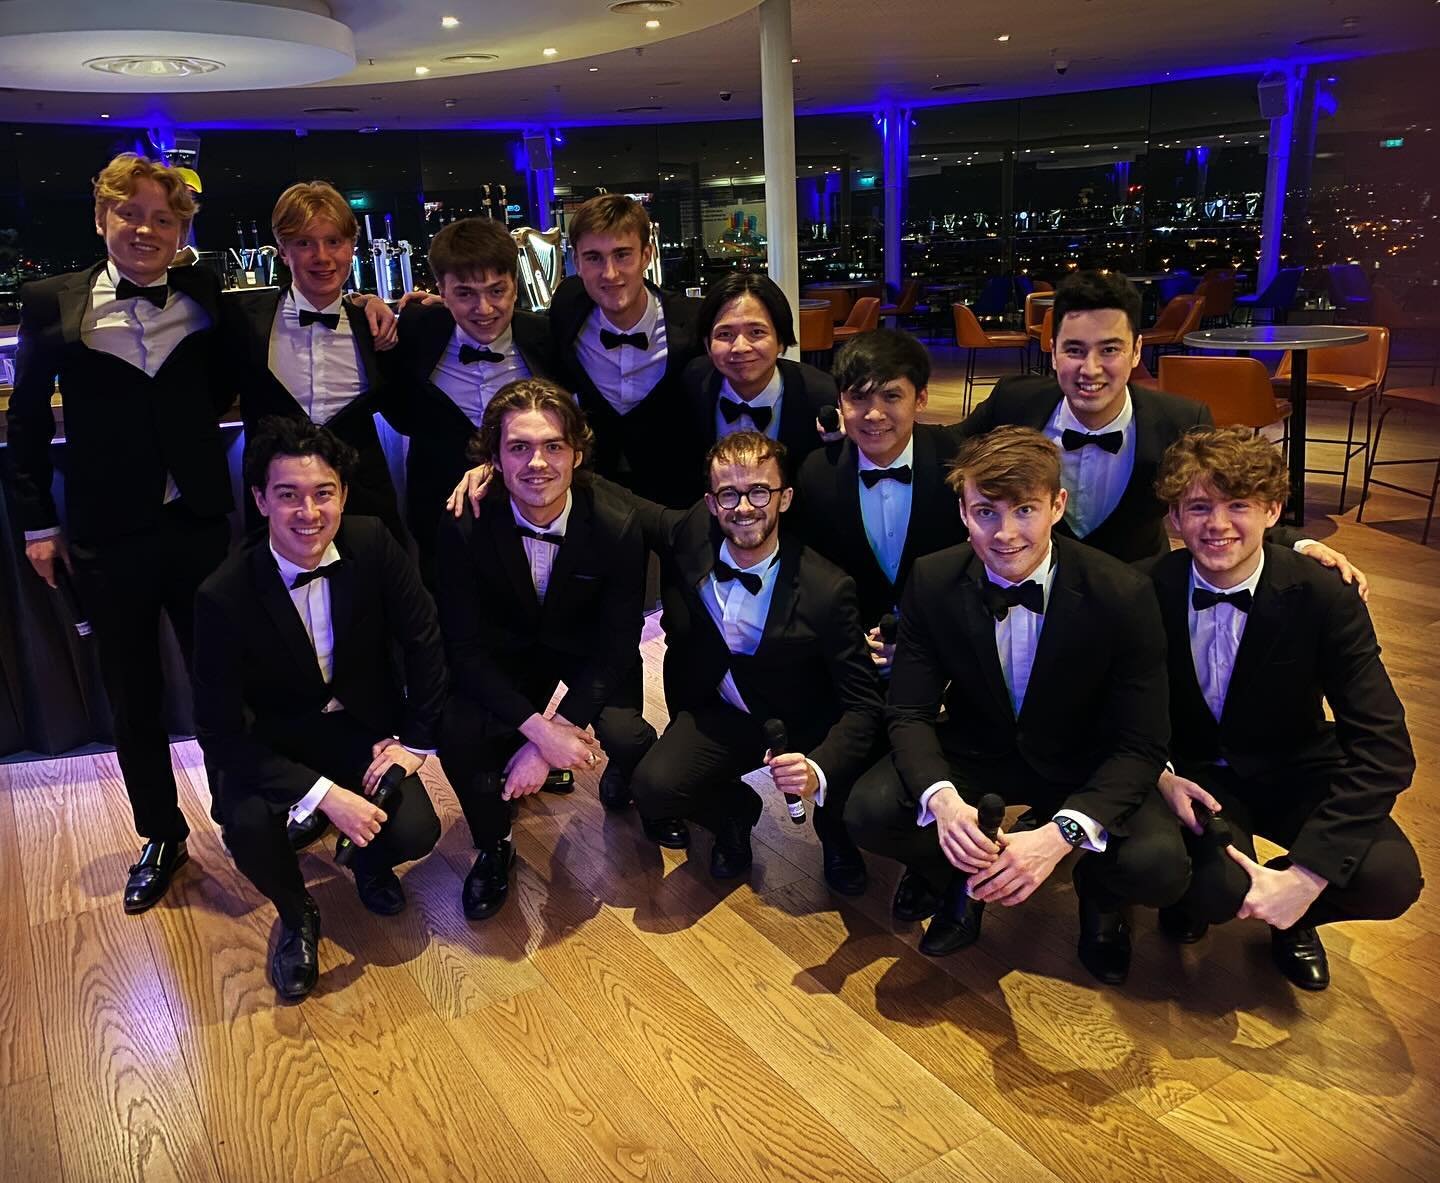 The tremendous @trinitones delighted the guests last evening for @stories_ireland @homeofguinness 
#harmony #acapella #trinity #tcd #dinnermusic #SEAentertainment #trinitones 
@seagency1